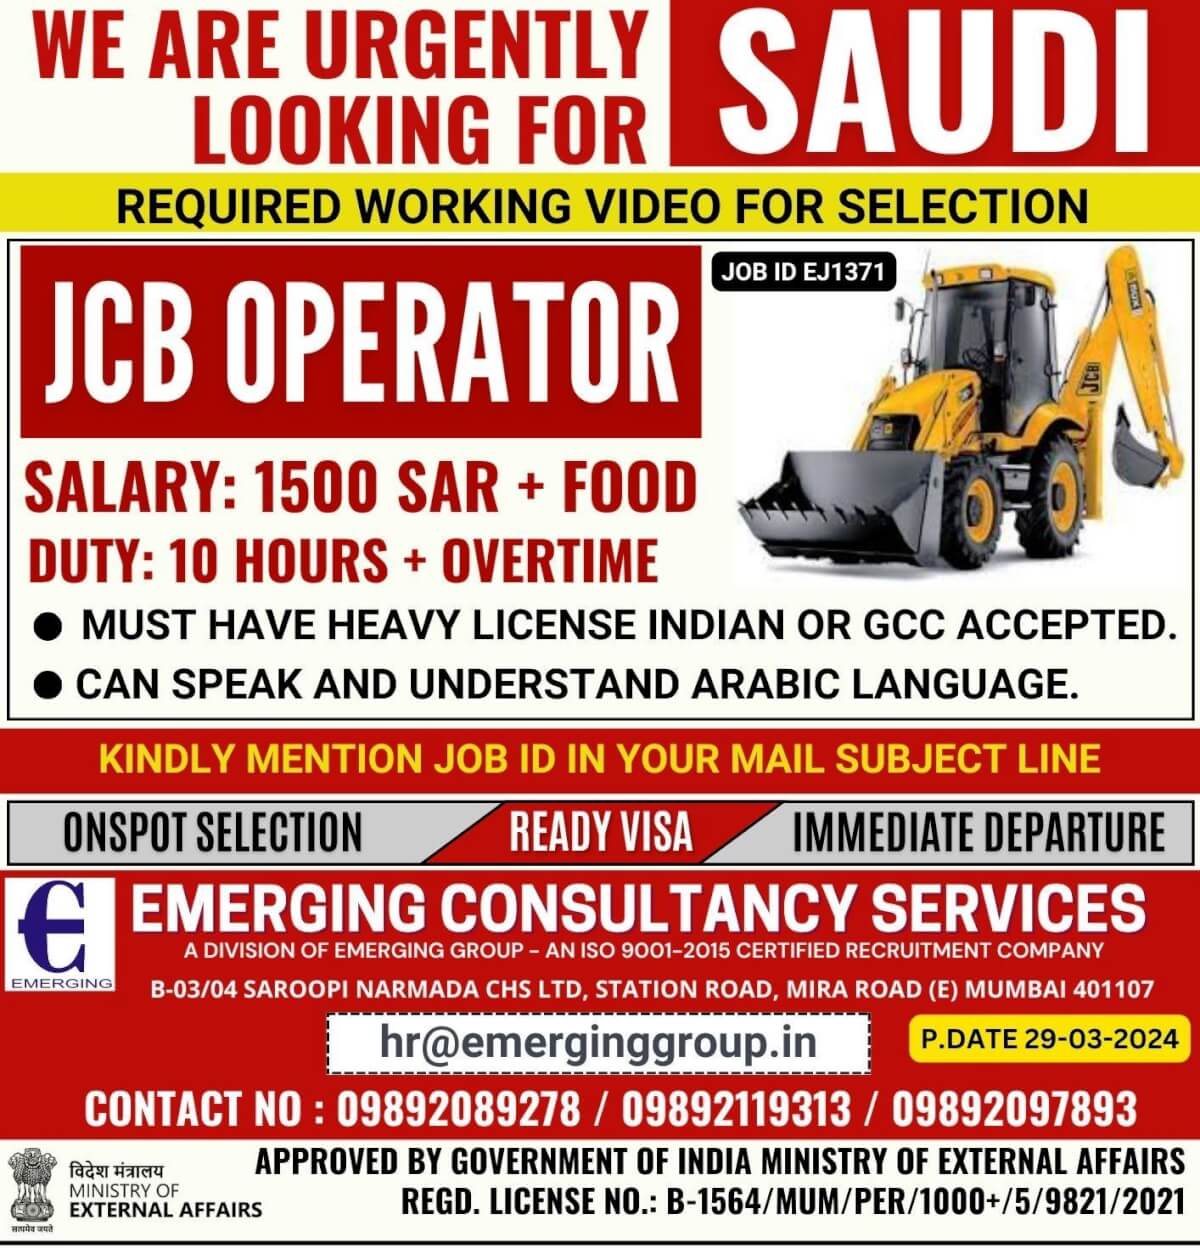 WE ARE URGENTLY LOOKING FOR JCB OPERATOR FOR SAUDI ARABIA